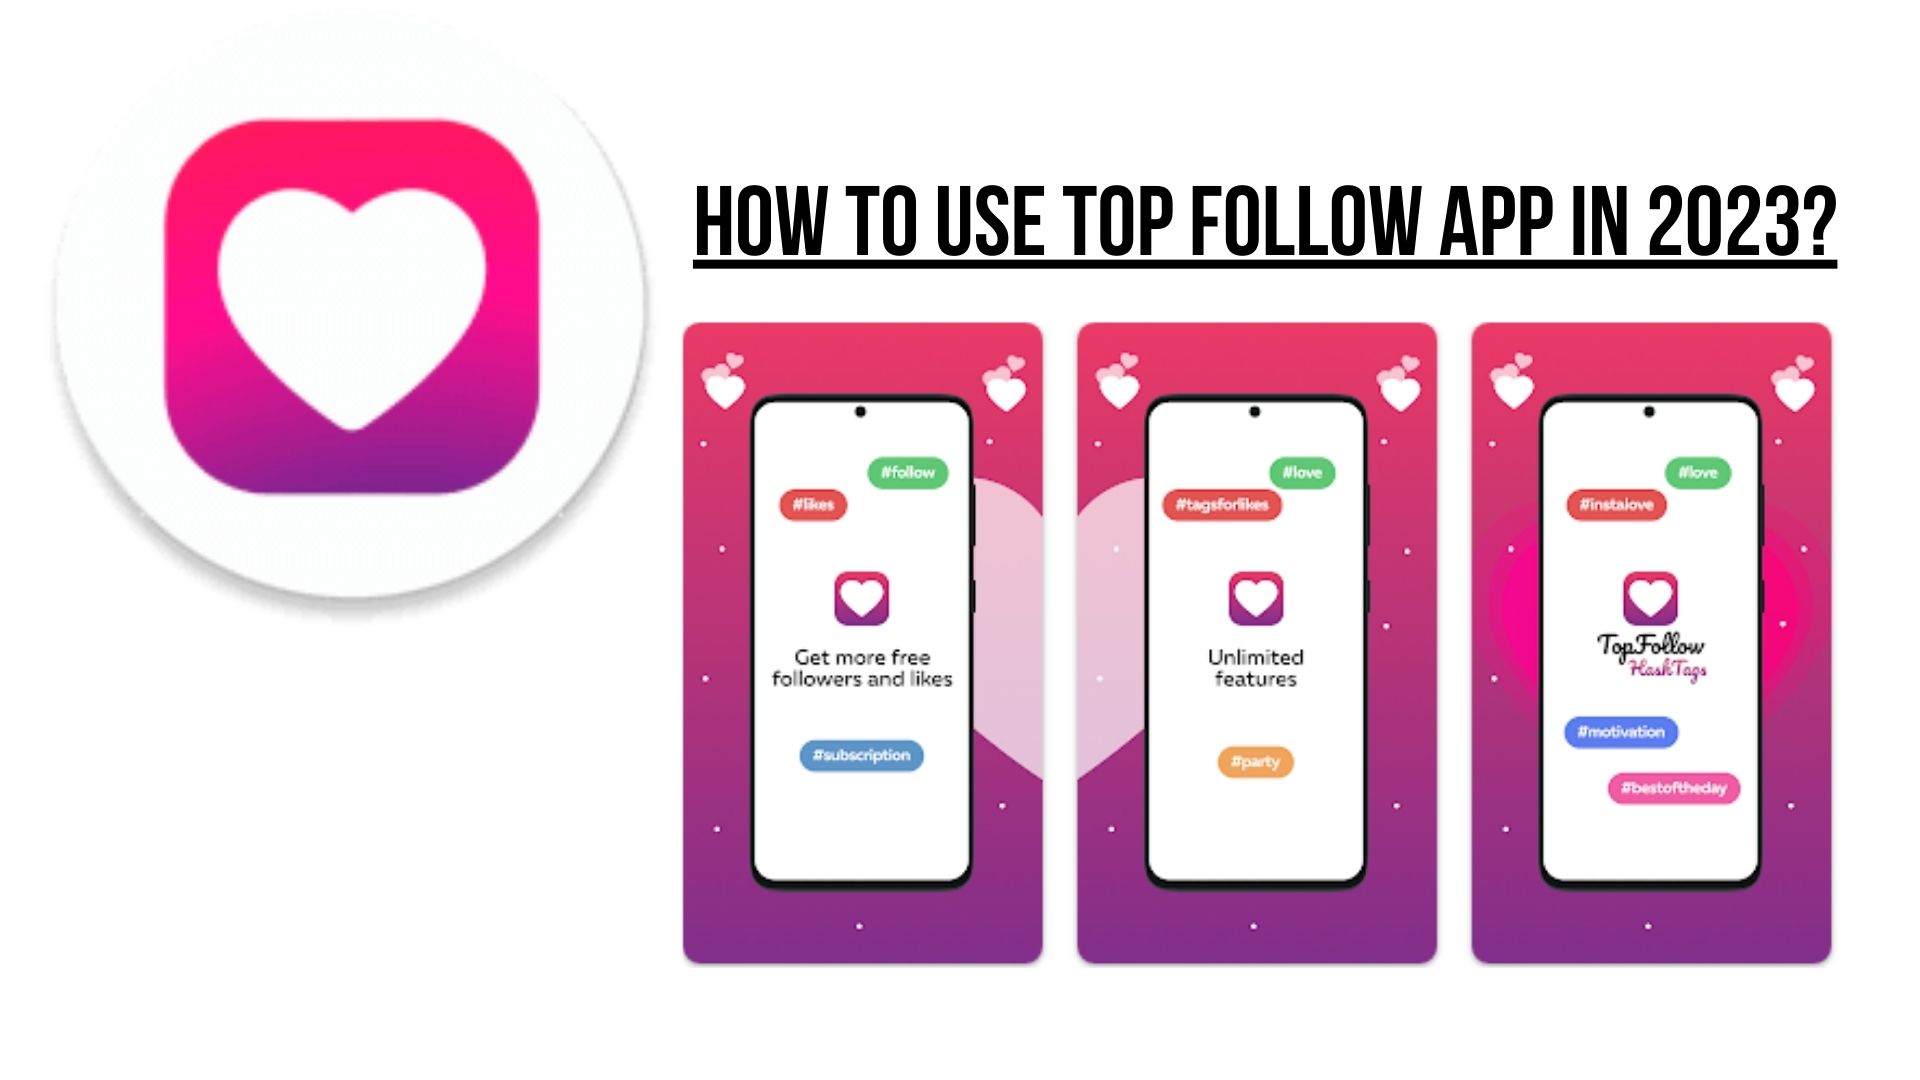 How To Use Top Follow APP In 2023